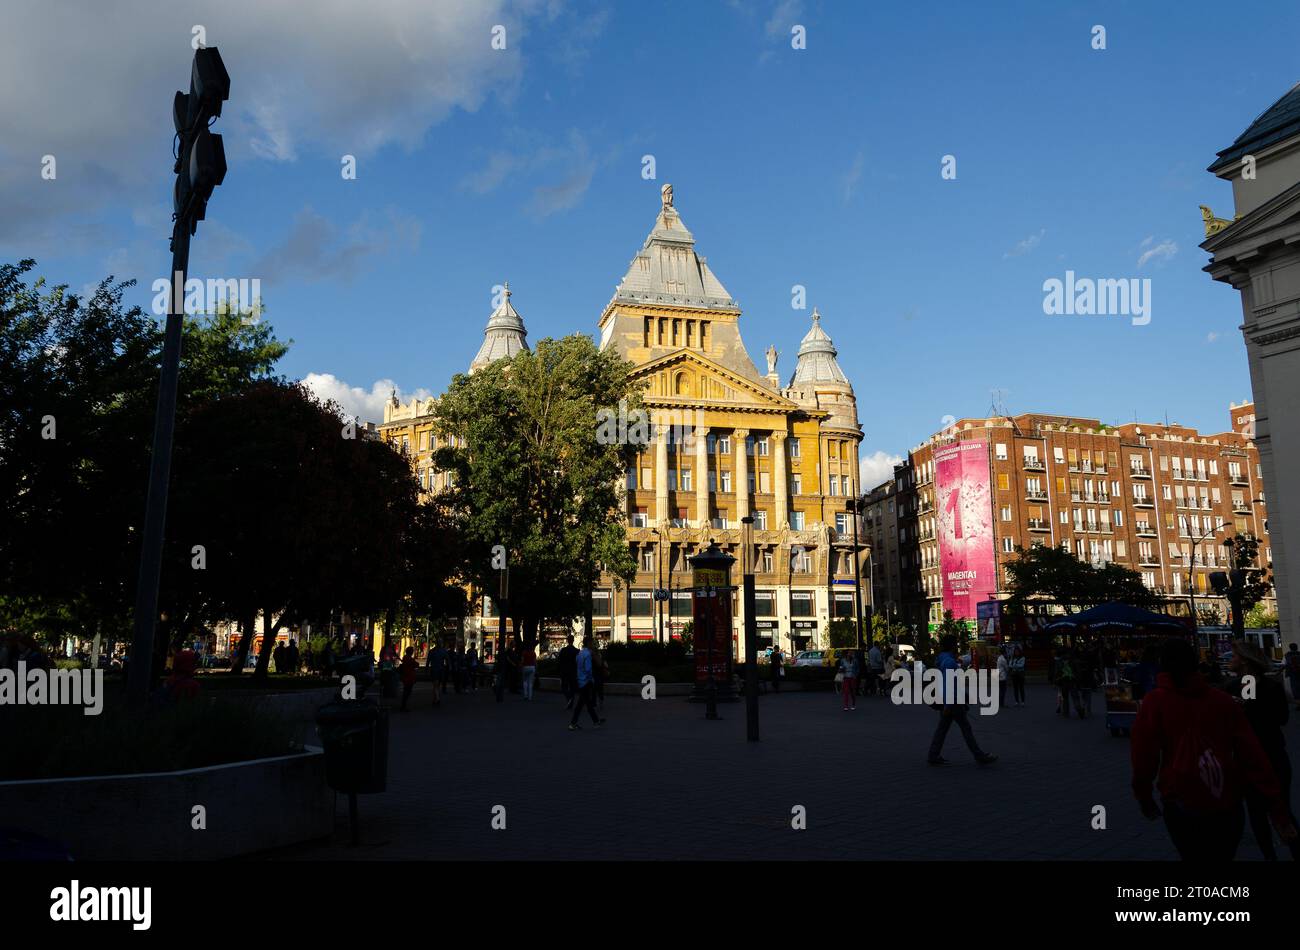 historical building of budapest Stock Photo